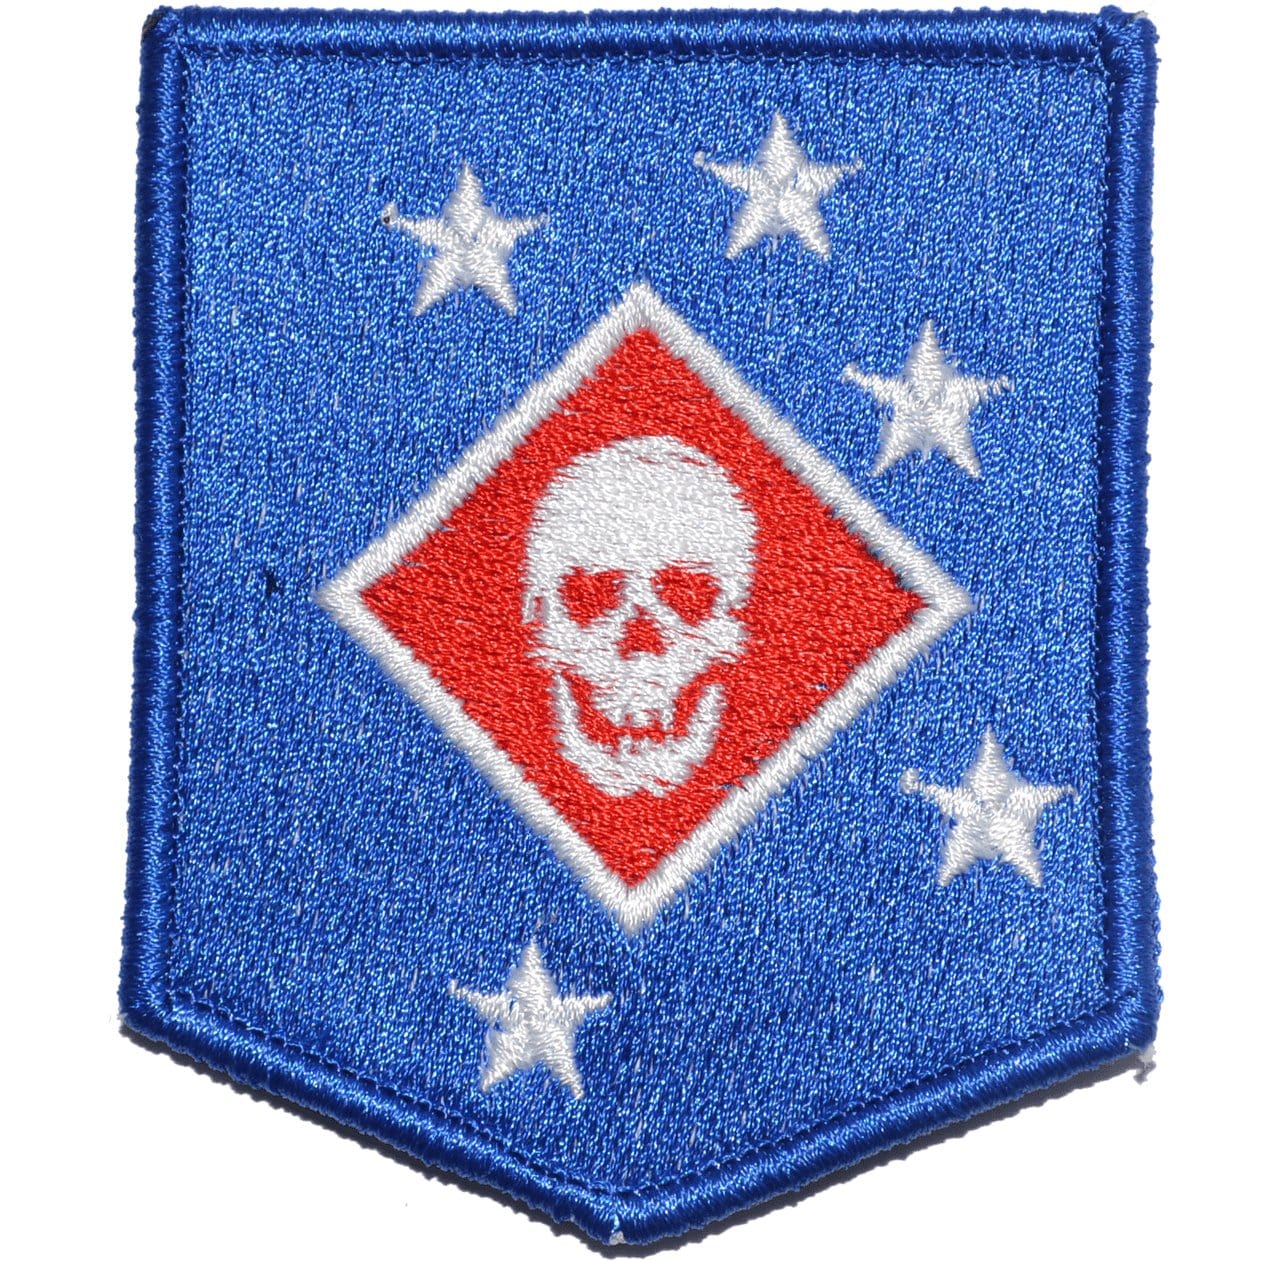 Tactical Gear Junkie Patches Full Color Marine Raider Battalion Thick Jaw Patch MarSOC - Shield Patch